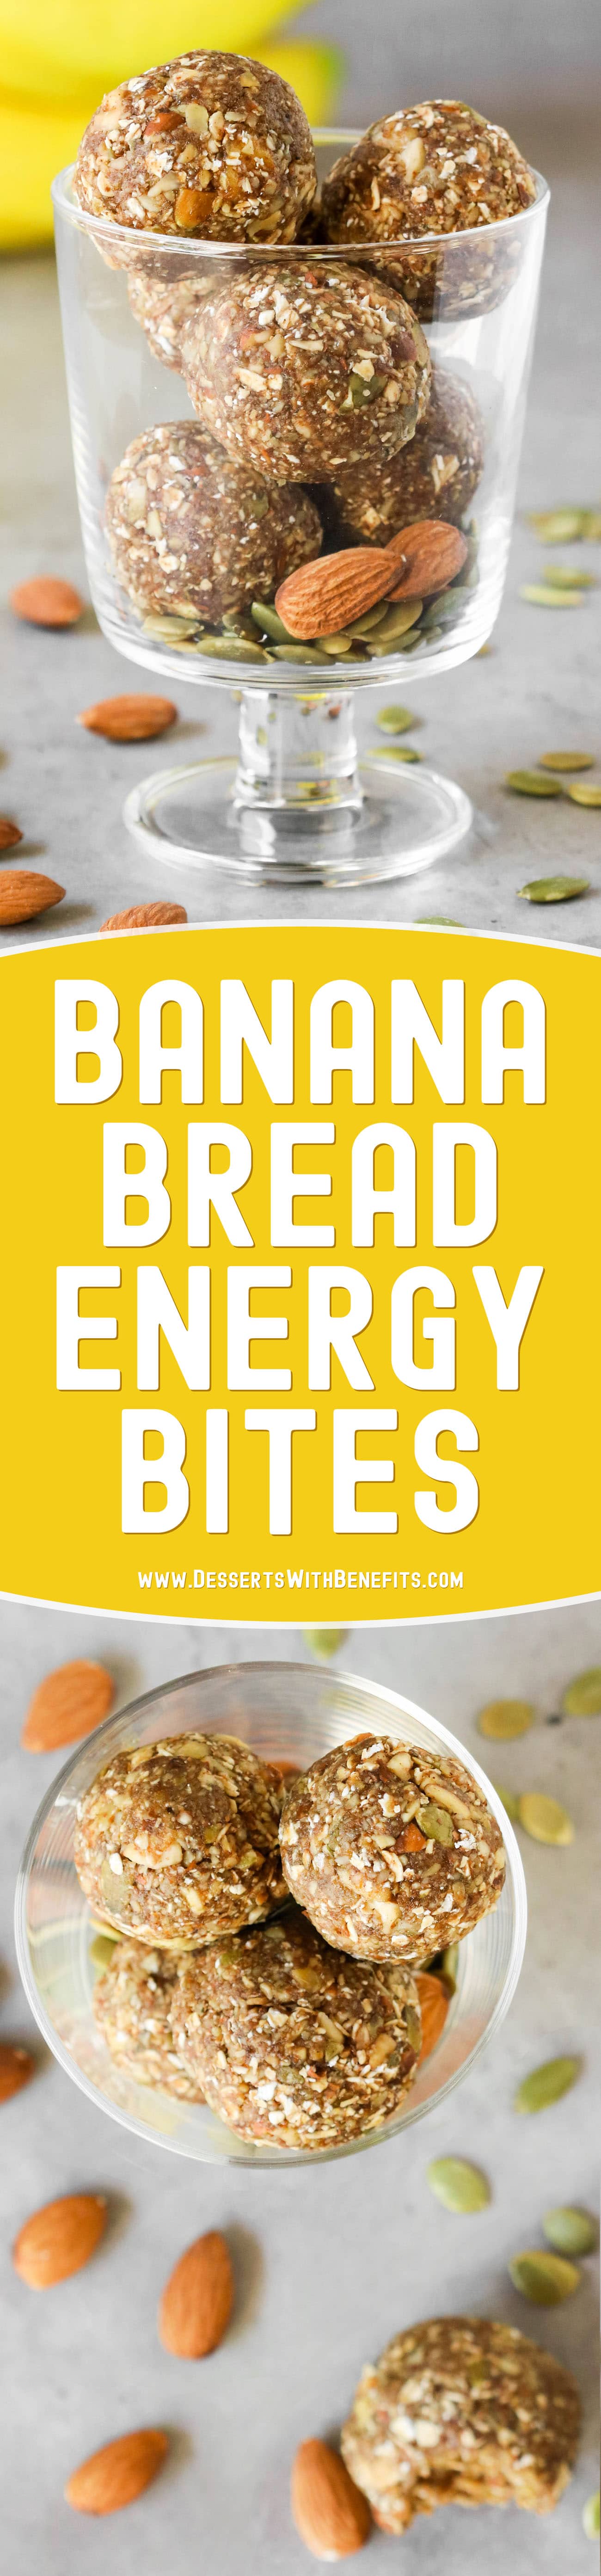 These Banana Bread No Bake Energy Bites are soft, fudgy, sweet, and delicious, it's hard to believe they're raw, vegan, and gluten free, with no added sugar! They're fast and easy to make with only seven ingredients required. Satisfy your banana bread cravings the healthy way with this energy bites recipe!